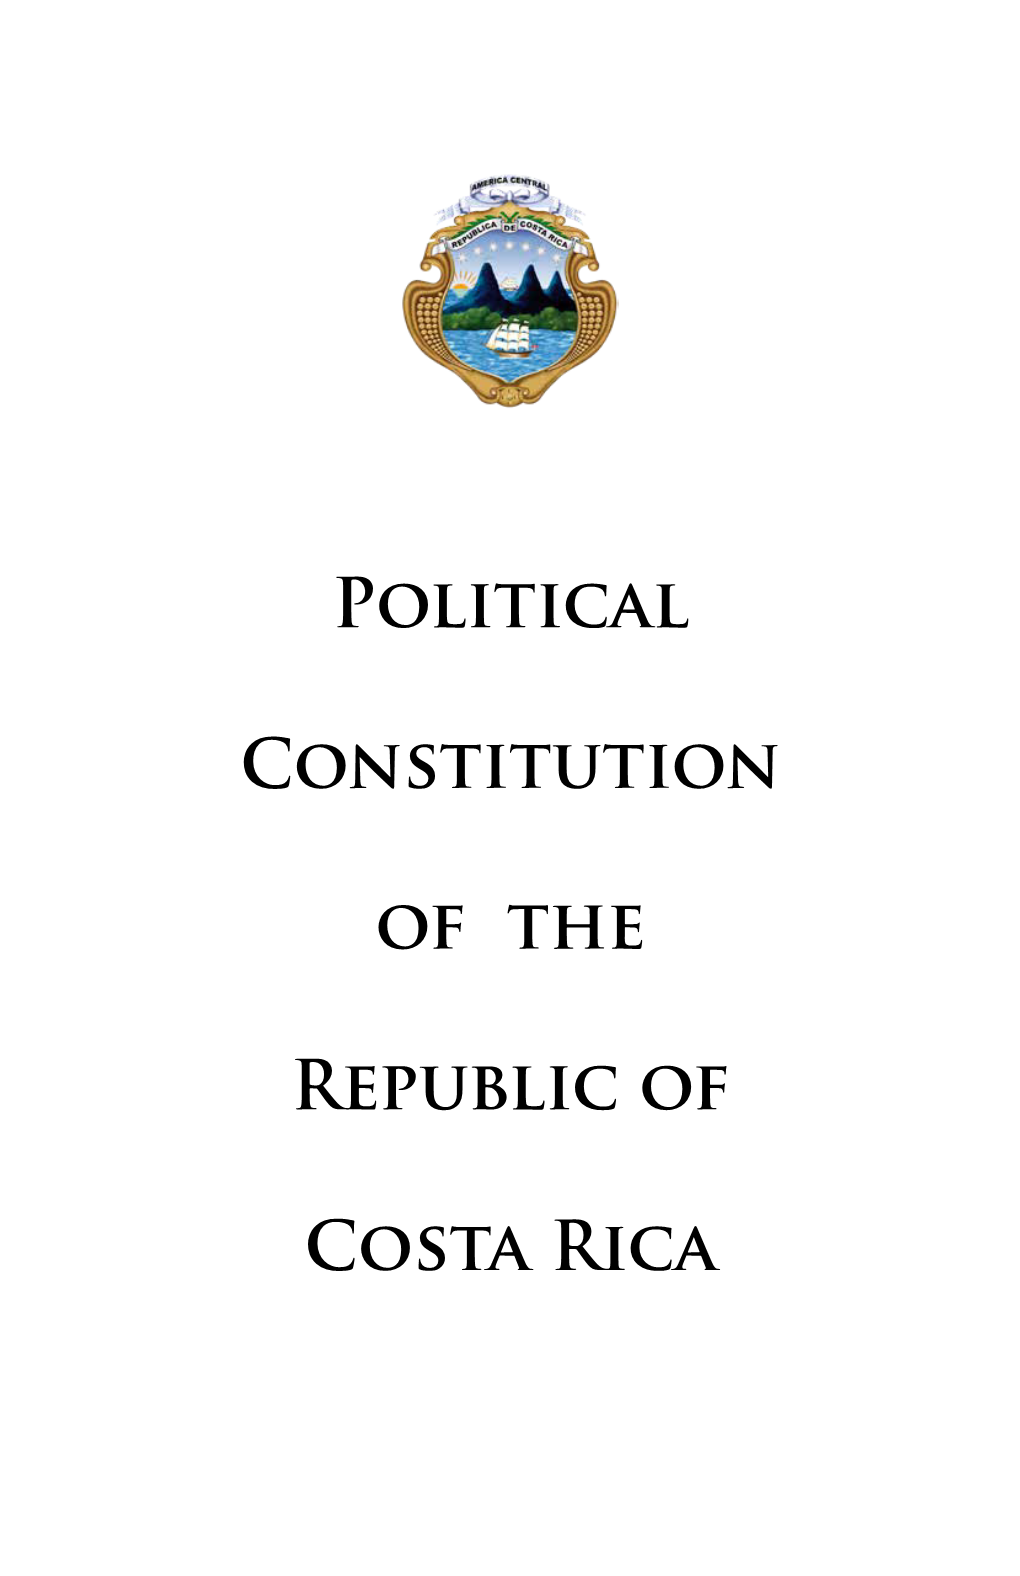 Political Constitution of the Republic of Costa Rica Has Been Amended Several Times